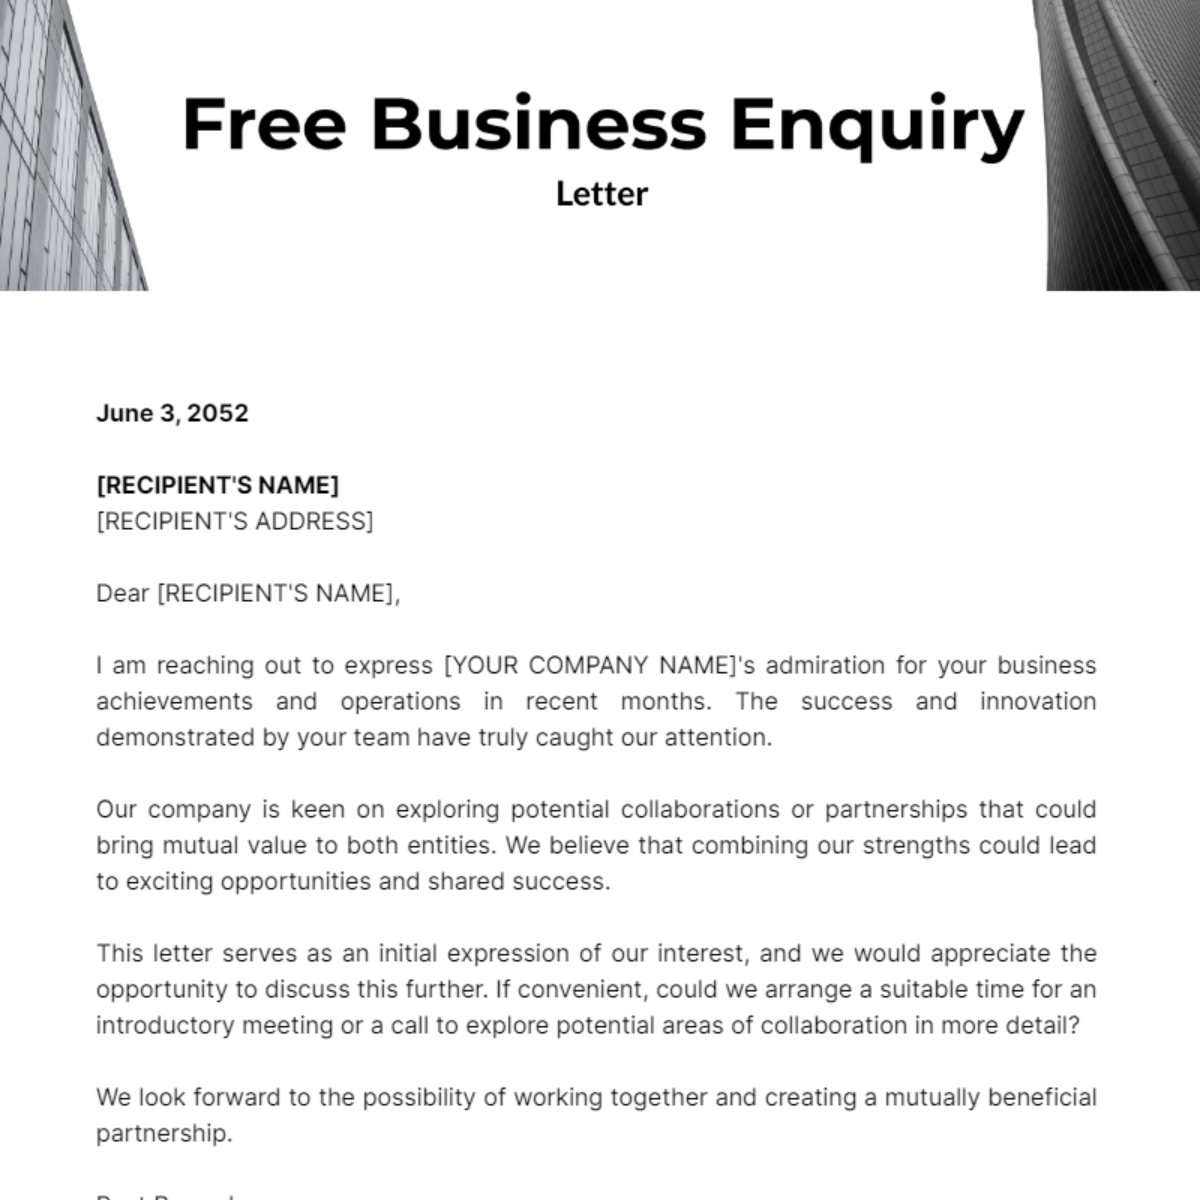 Business Enquiry Letter Template